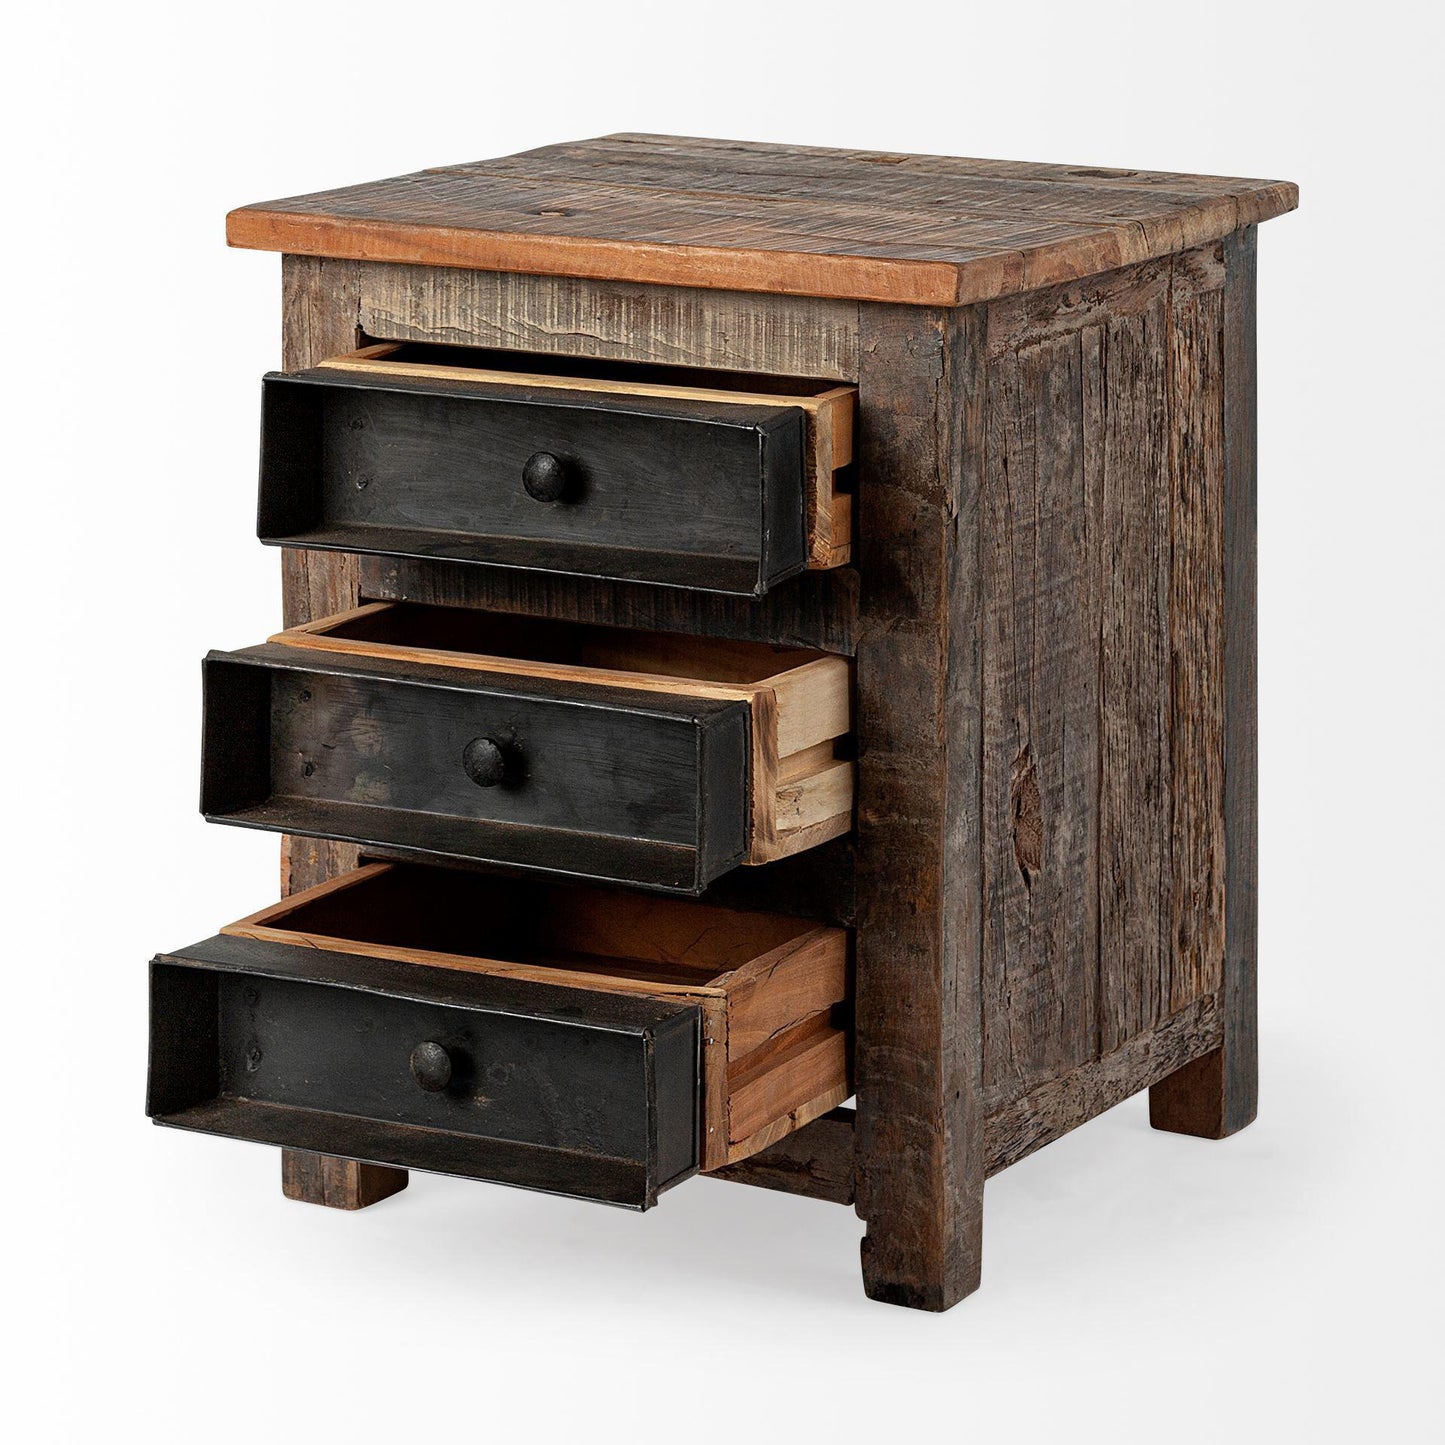 Wilton III 18.5L x 18.5W x 22.5H Reclaimed Wood and Metal End/Side Table